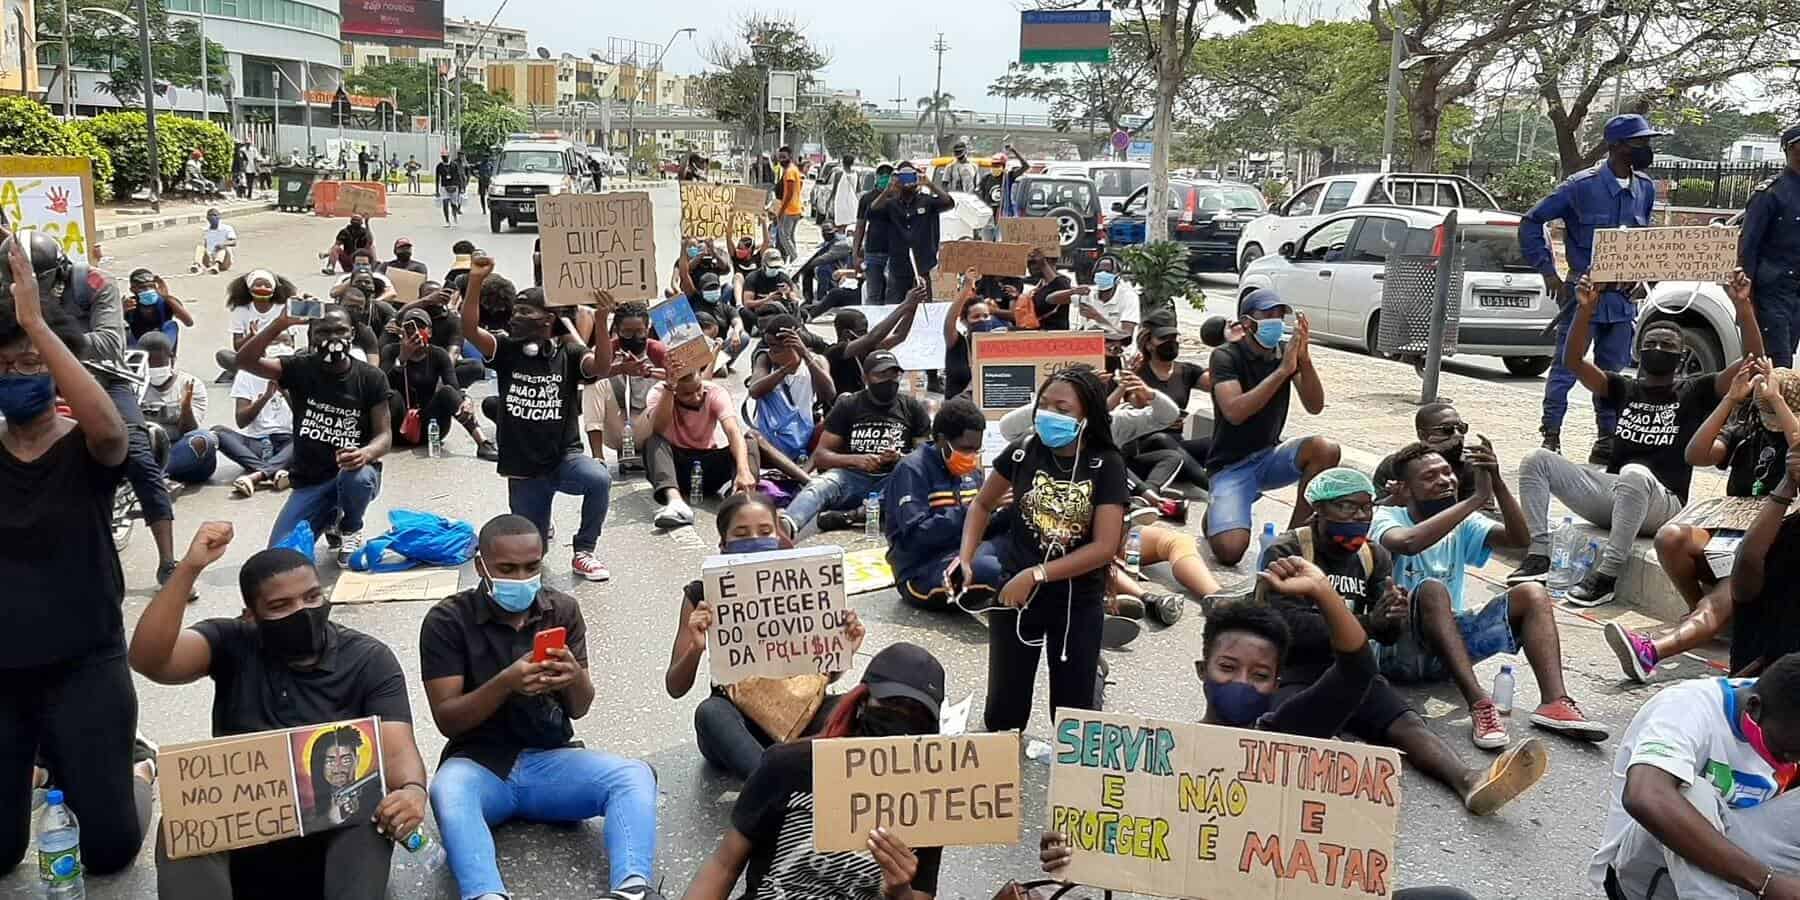 #VidasAngolanasImportam: Angolans Protests the country’s poor governance